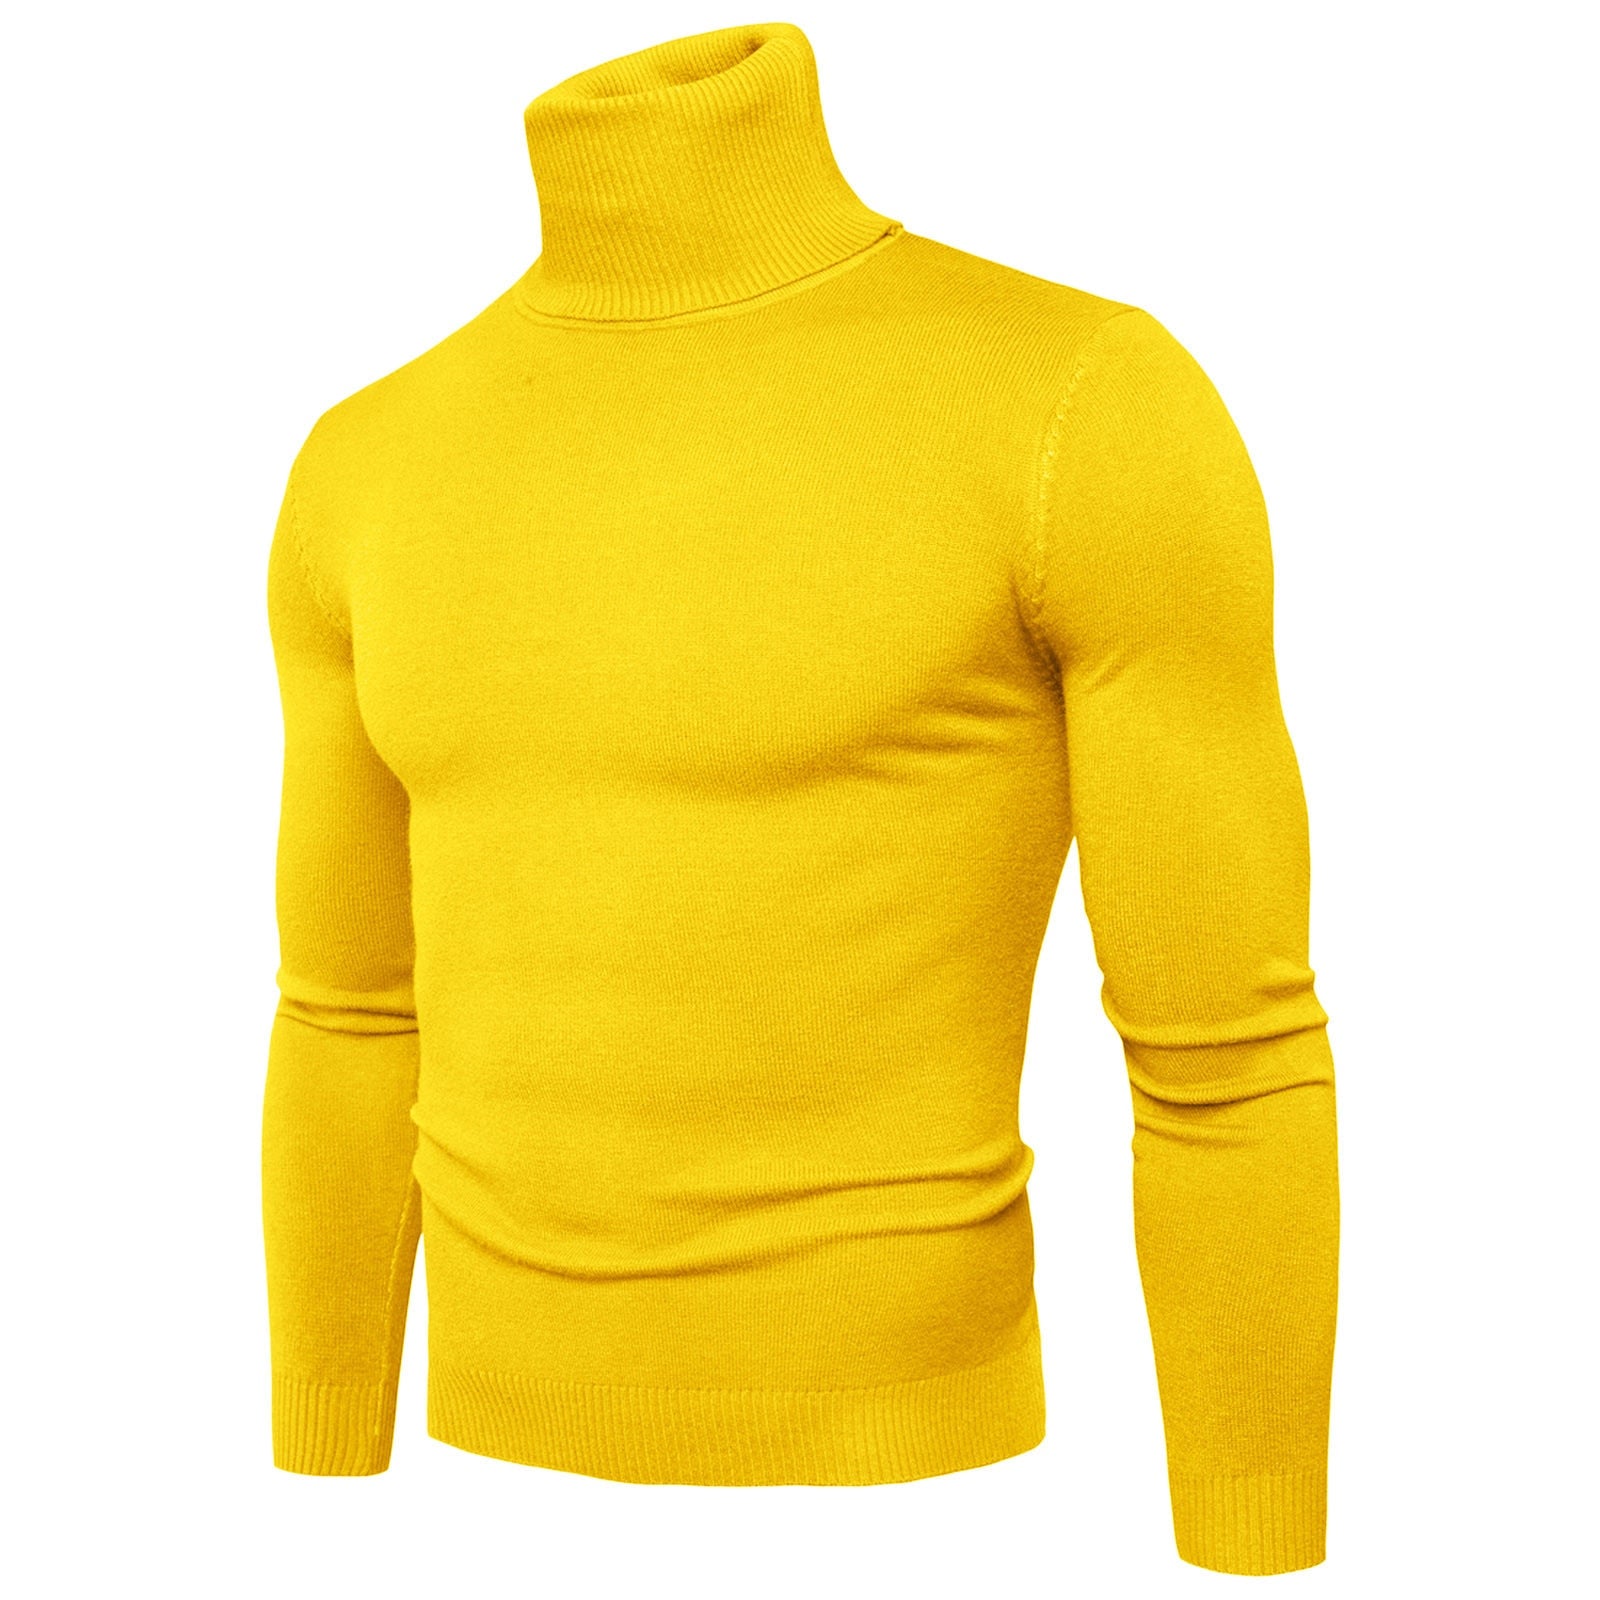 Men's Casual Slim Fit Basic Turtleneck Knitted Sweater High Collar Pullover Male Double Collar Autumn Male Tops - integrityhomedecor